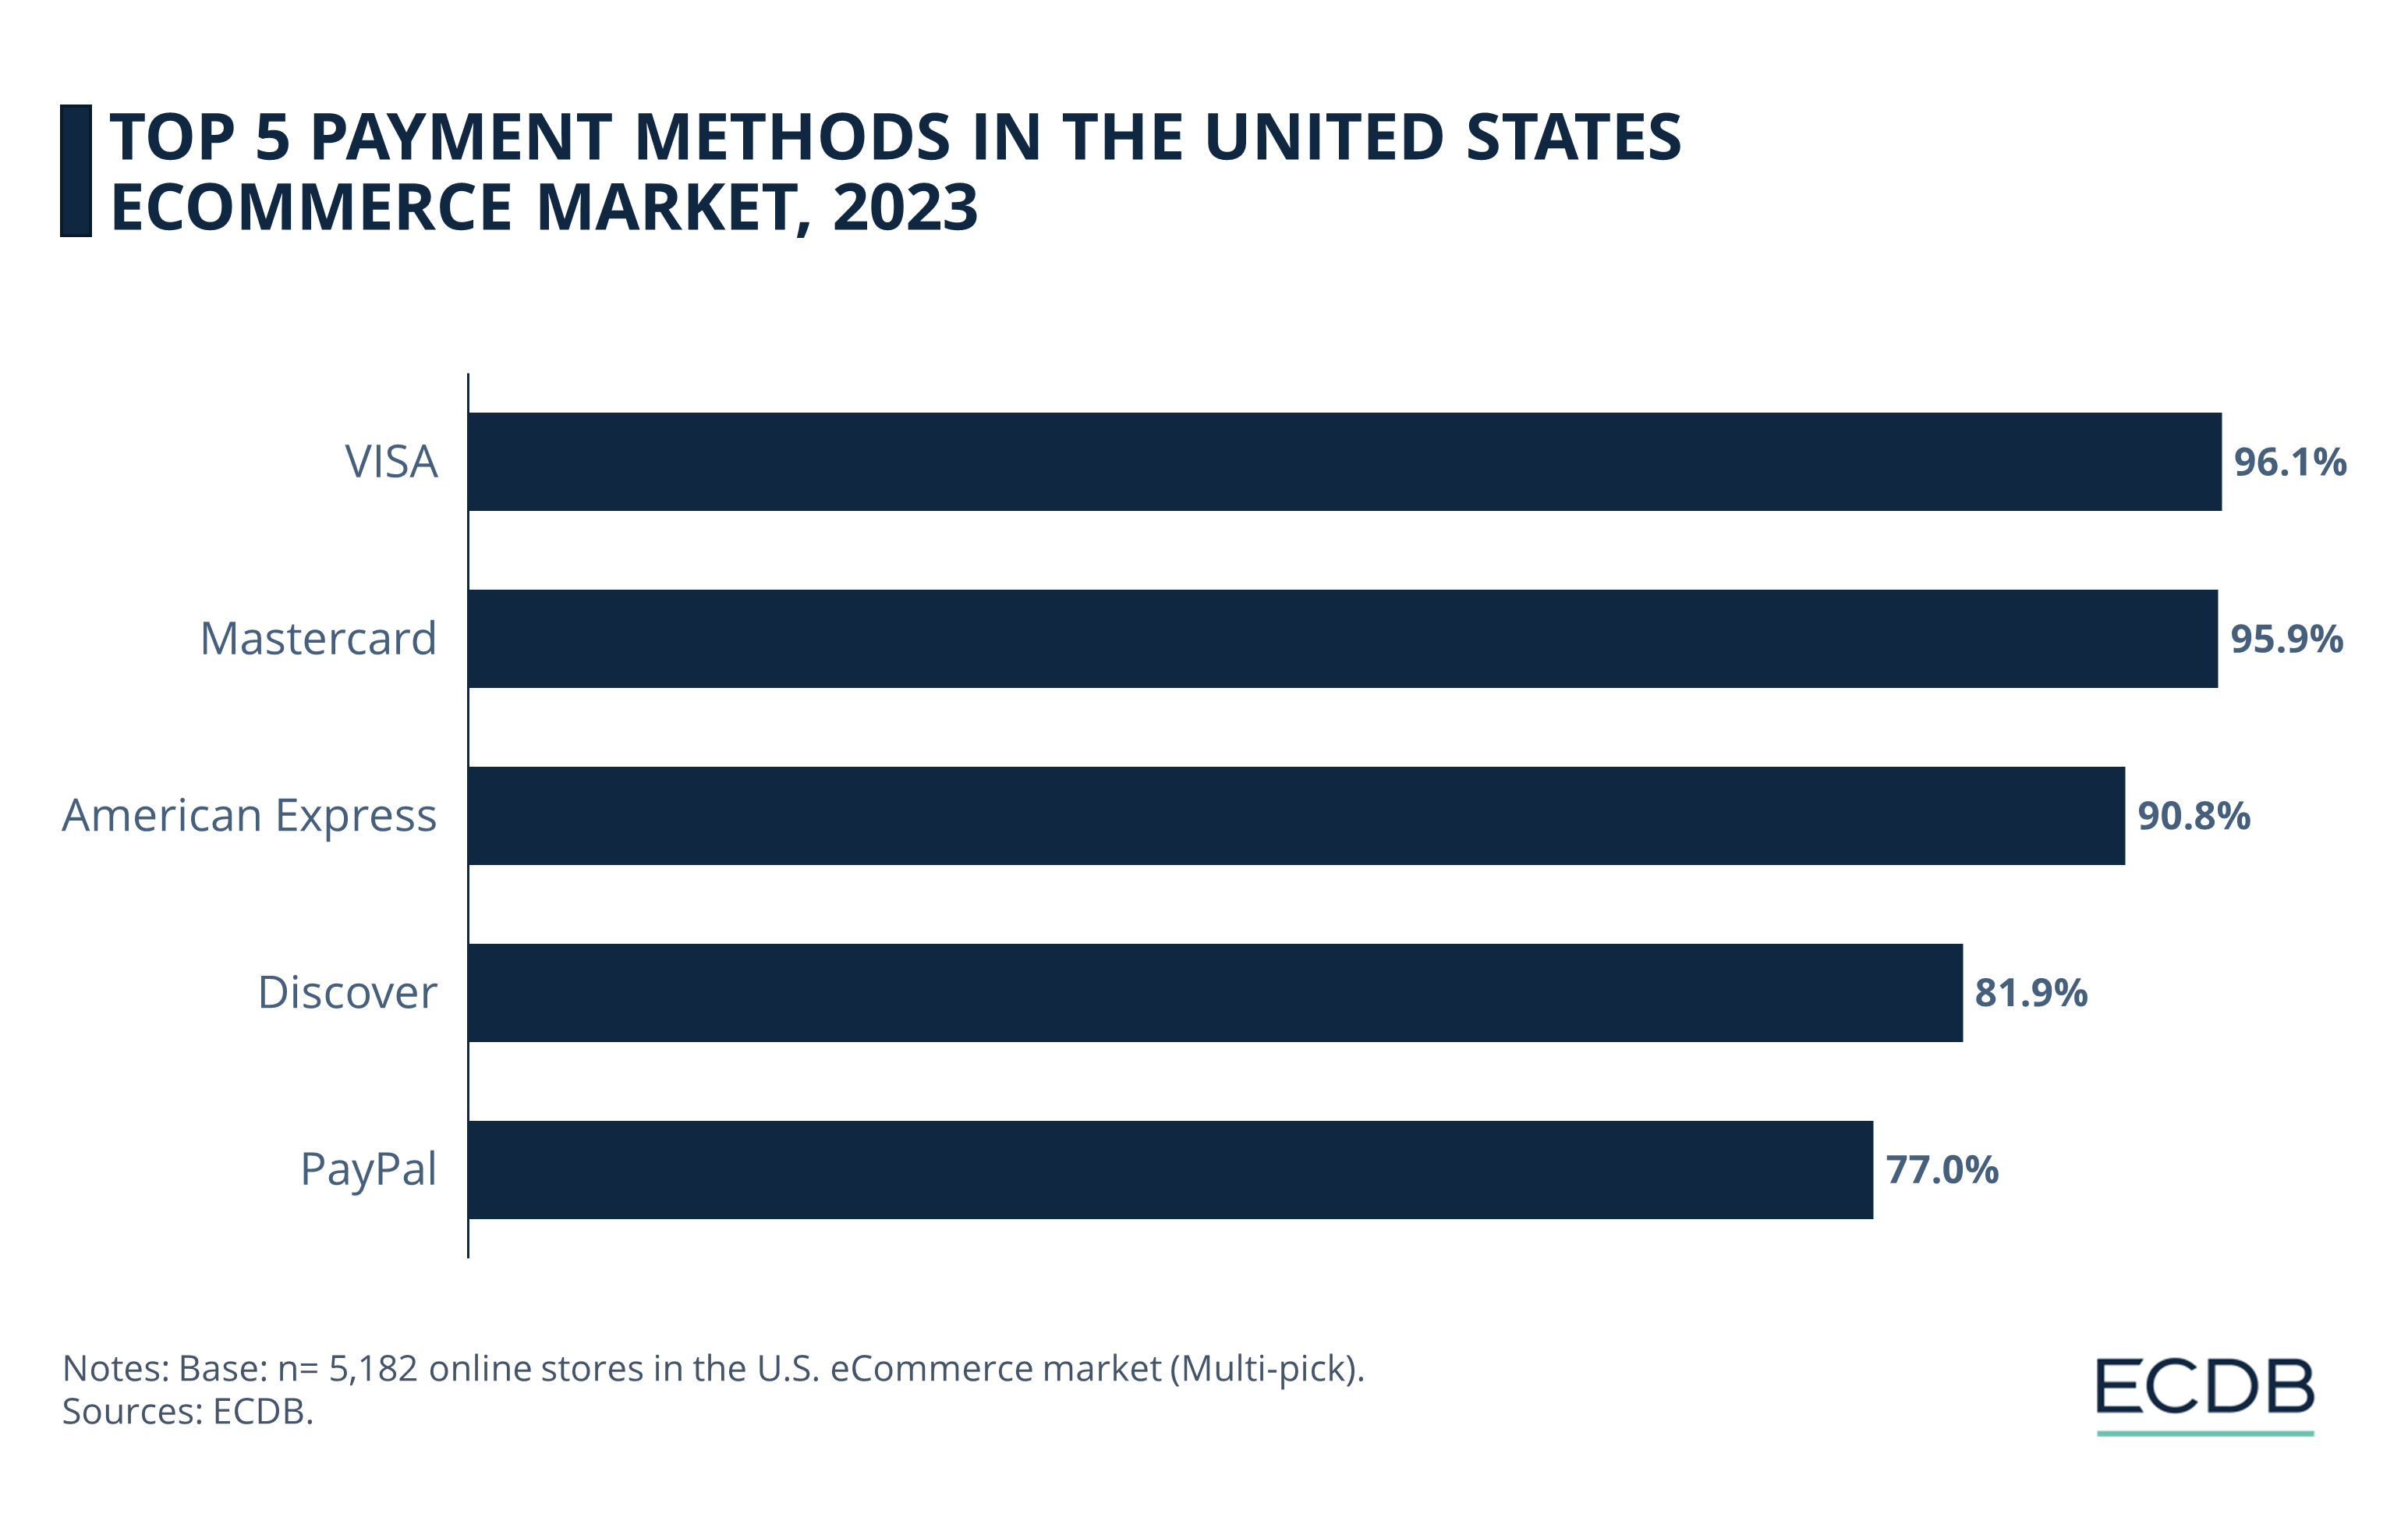 Top 5 Payment Methods in the United States eCommerce Market, 2023